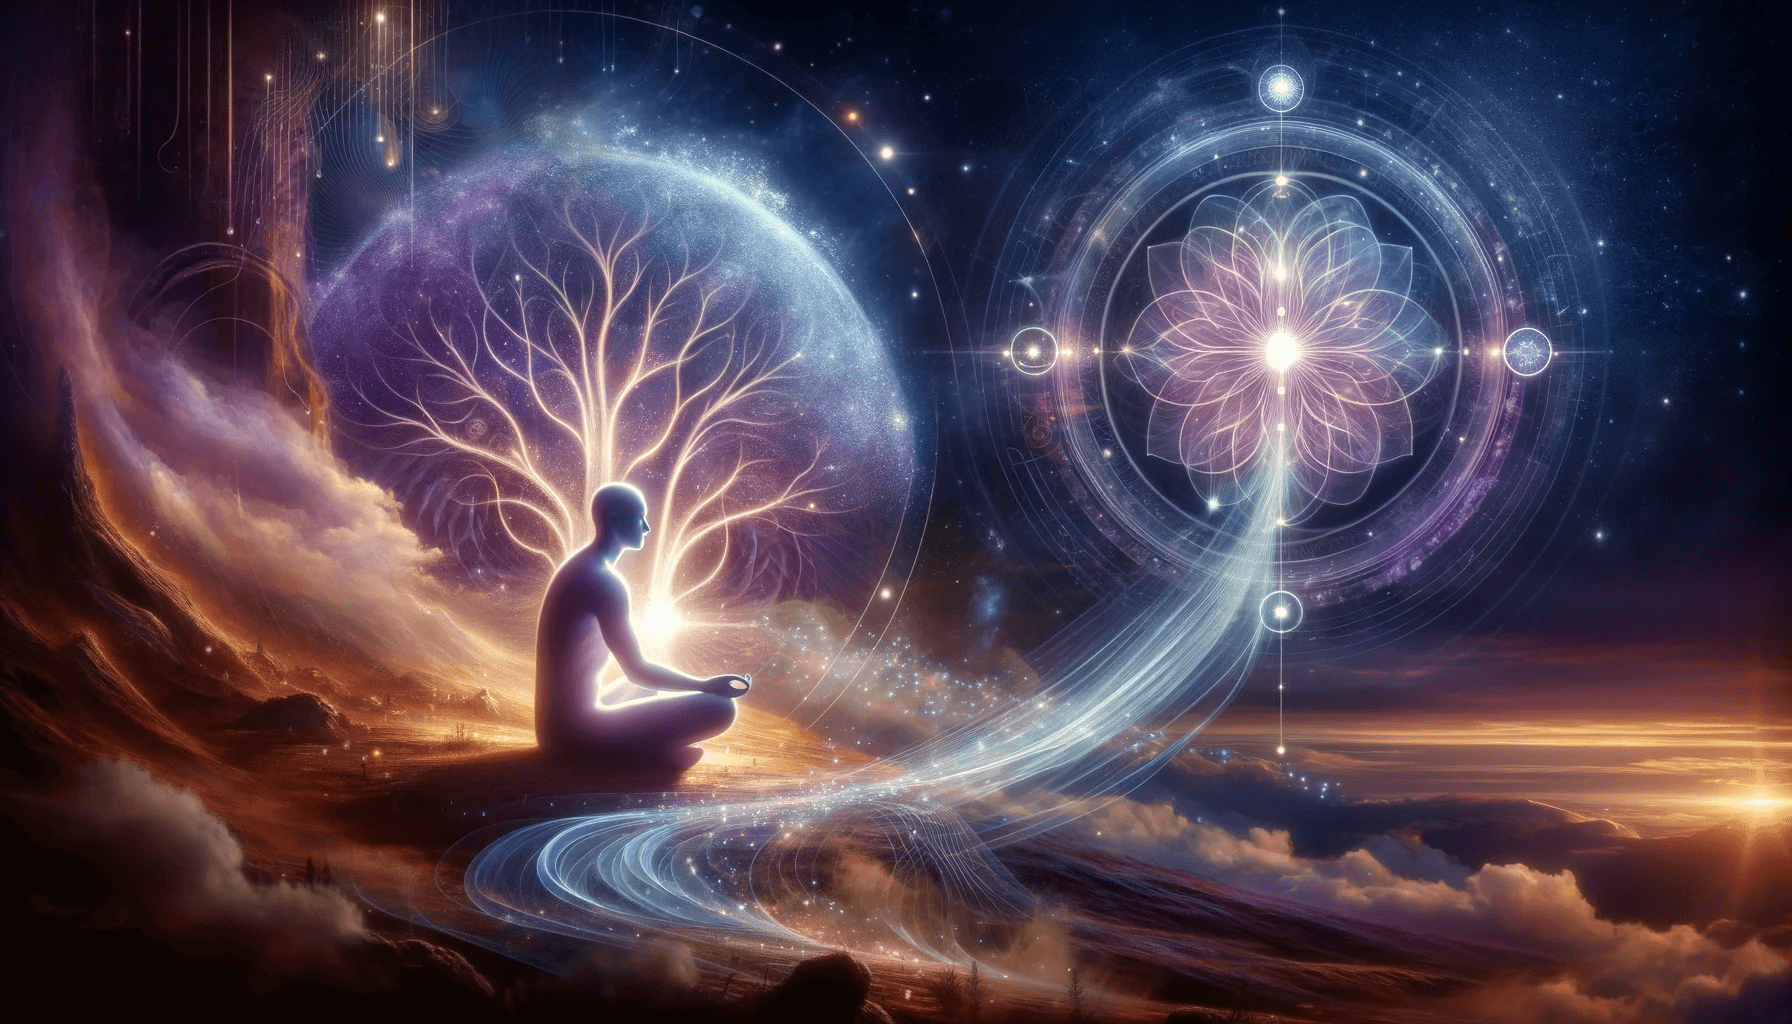 Discovering the Hidden Wisdom Within A Journey to Your Higher Self